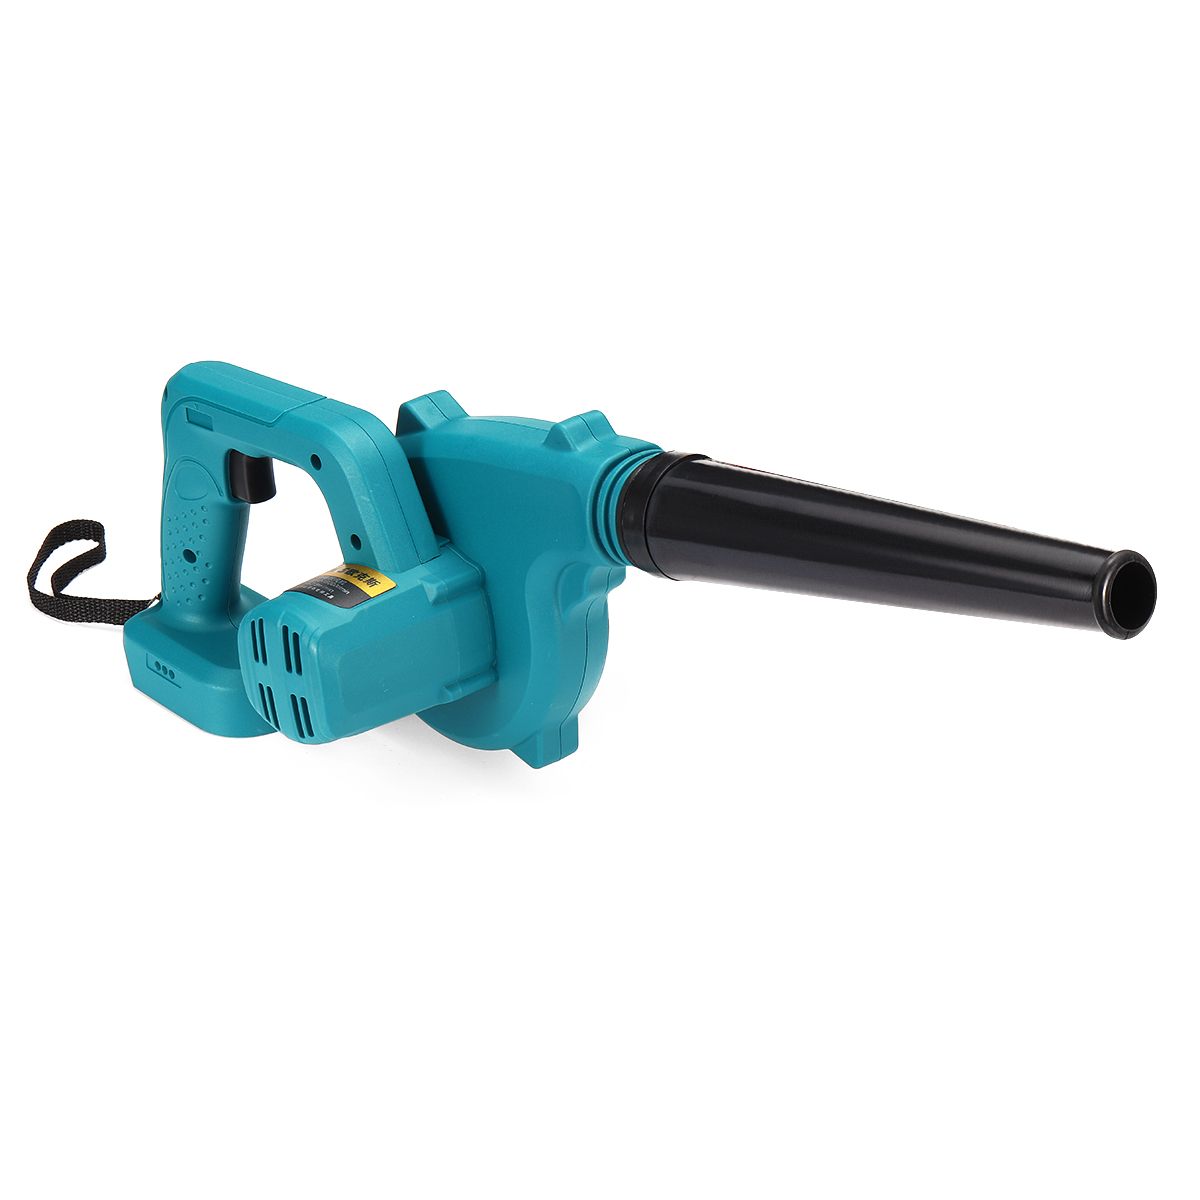 for 18V Makita Li-ion Battery Cordless Electric Air Blower & Suction Handheld Leaf Computer Dust Collector Cleaner Power Tool